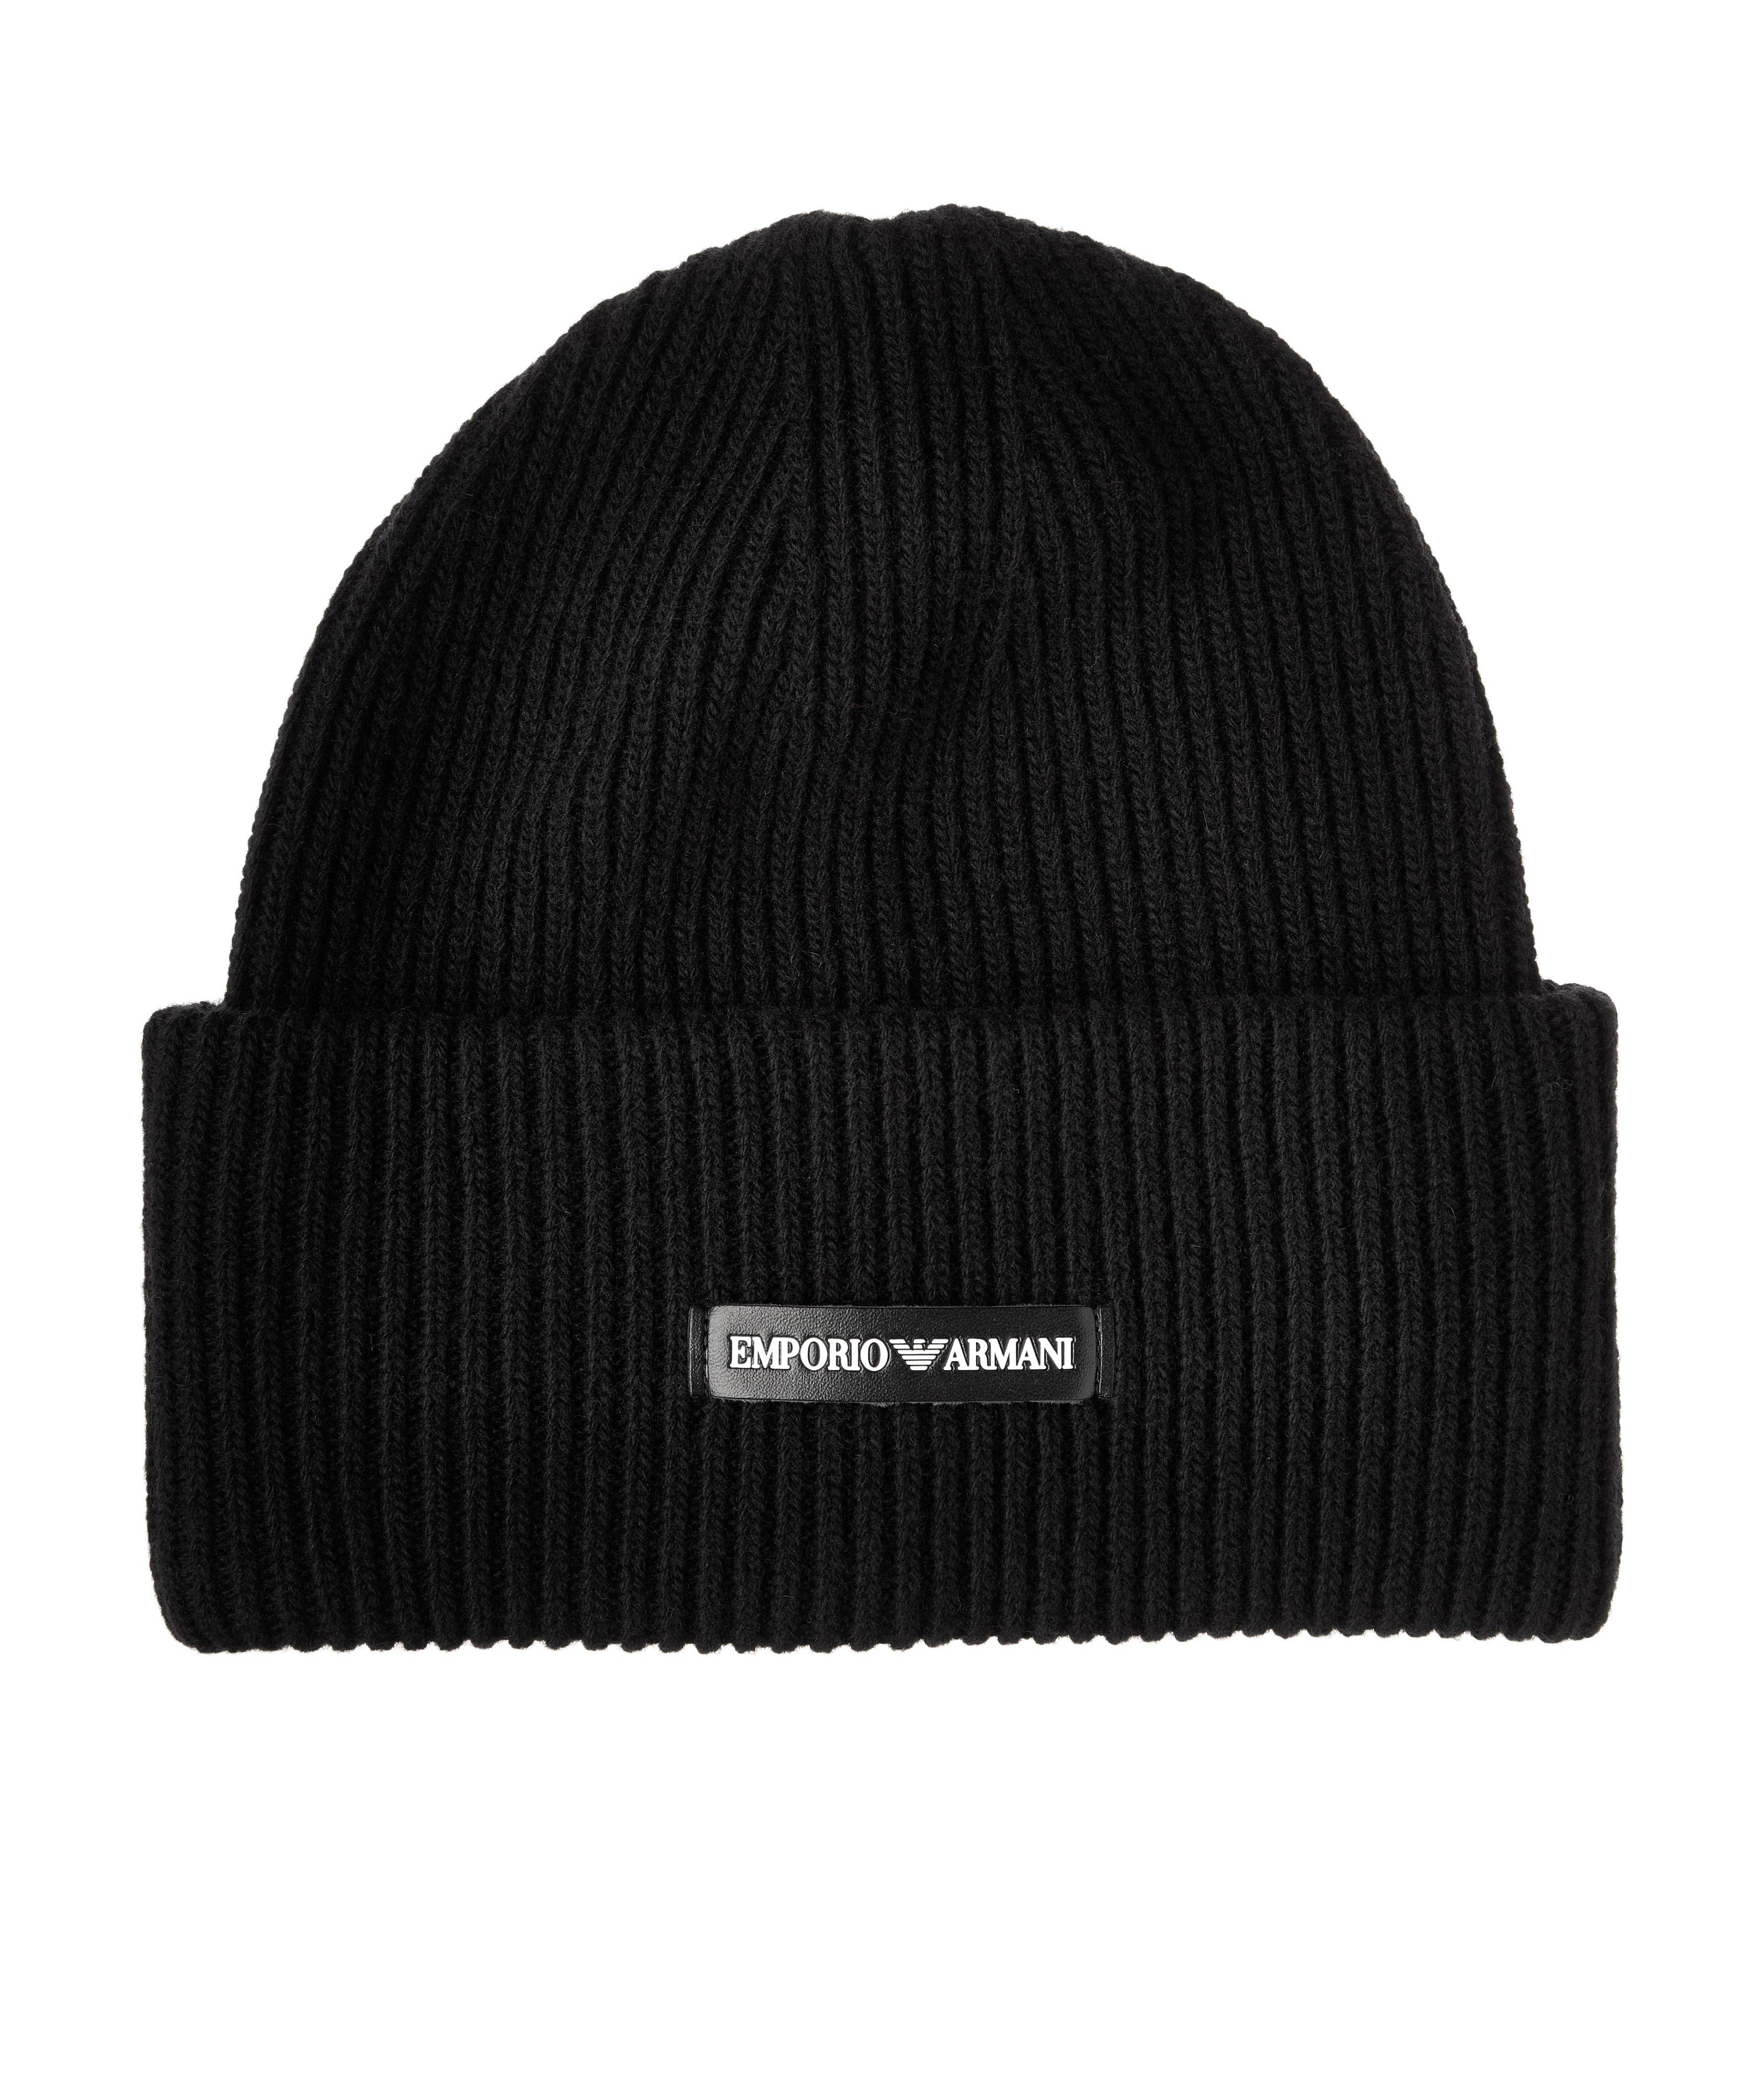 Logo Patch Ribbed Wool Beanie image 0